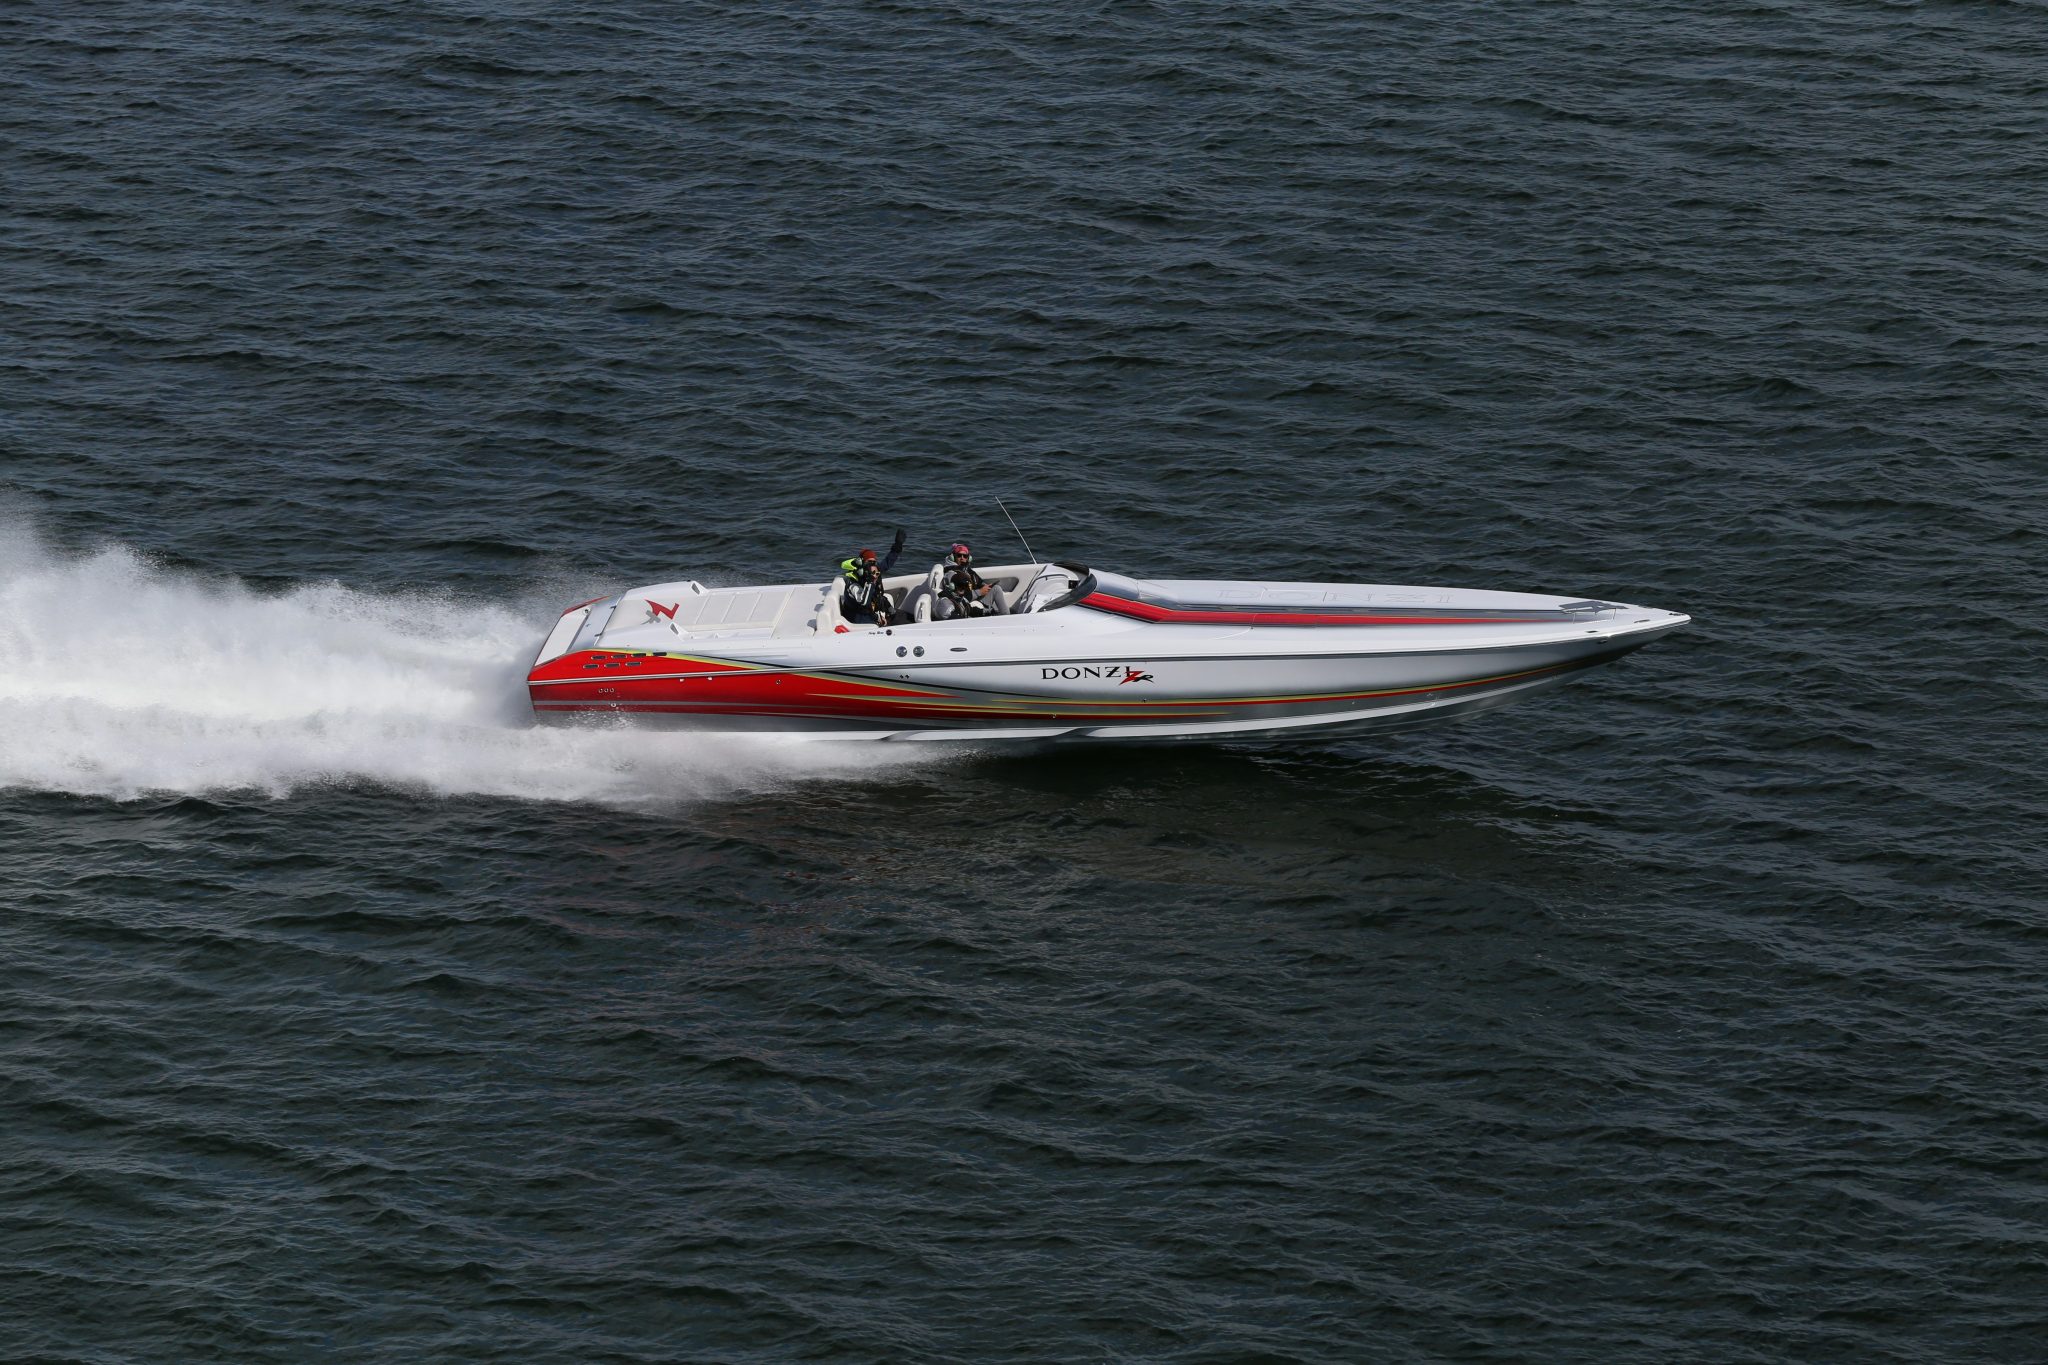 The superboats are back!